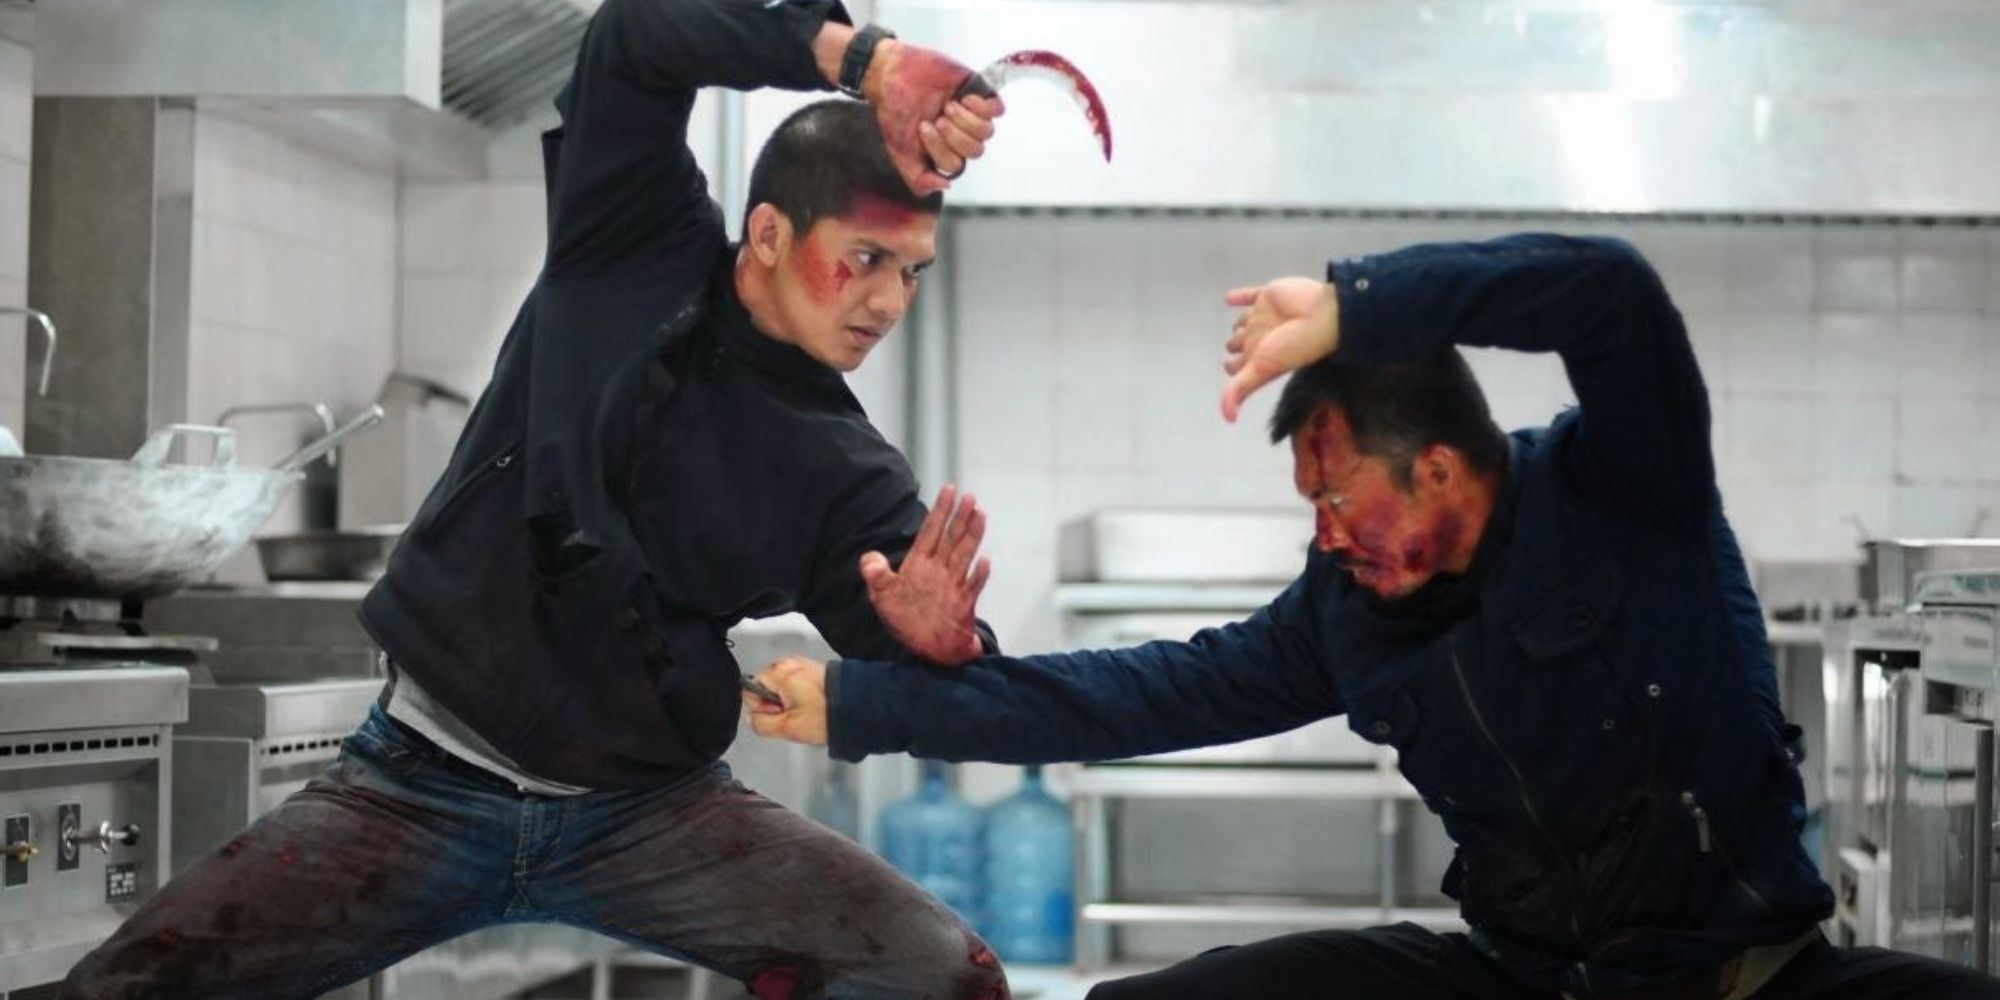 Two men fighting in a kitchen in The Raid 2